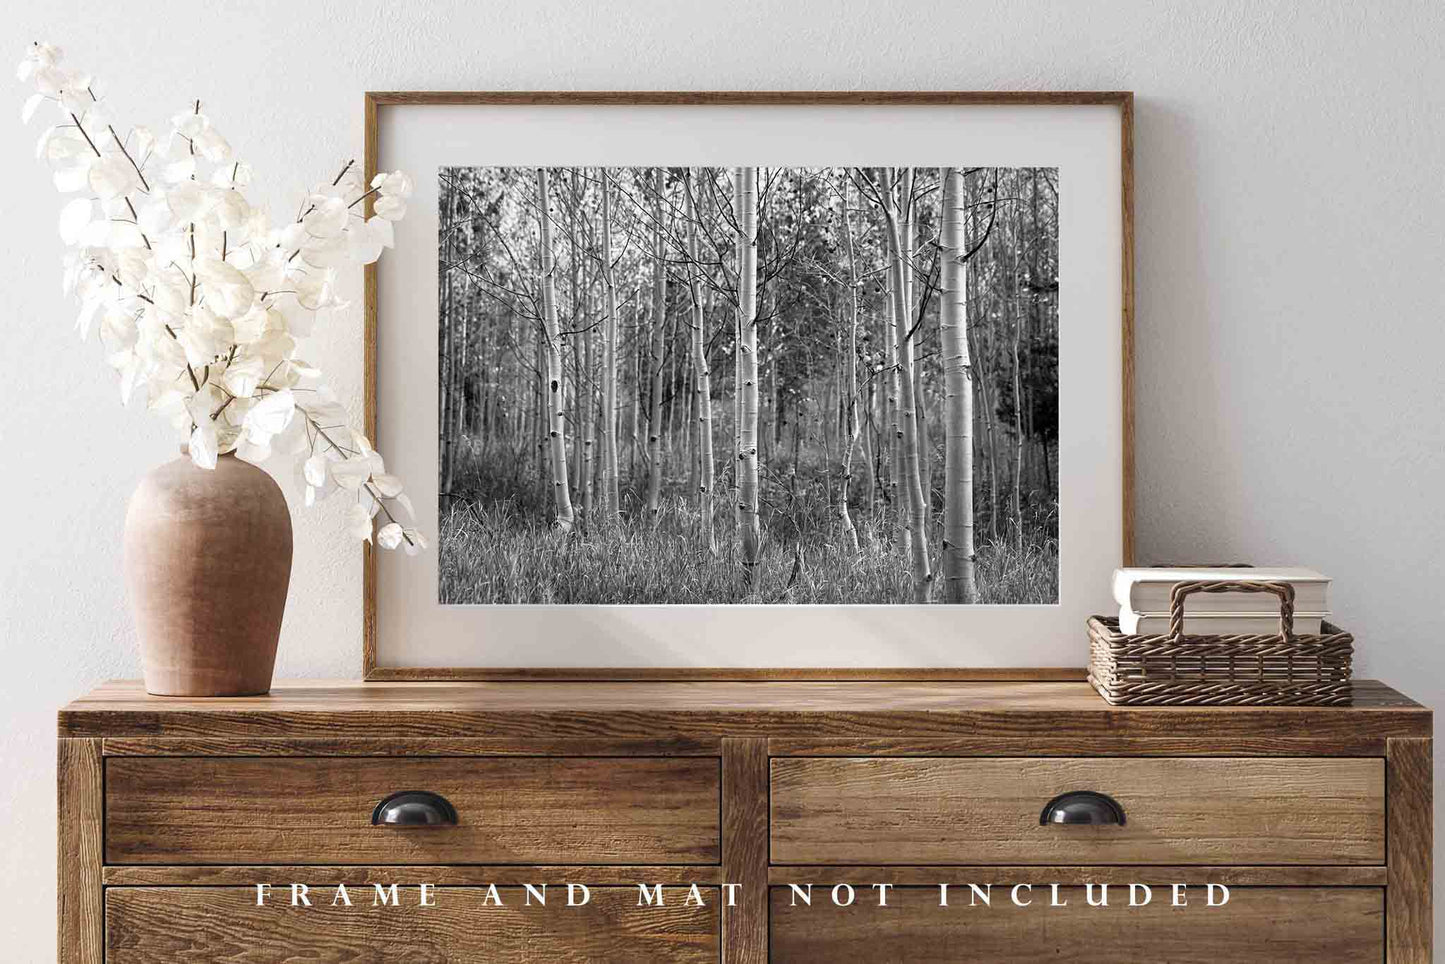 Black and White Photography Art Print - Wall Art Picture of Fall Aspen Trees in Colorado Forest Western Decor 4x6 to 40x60